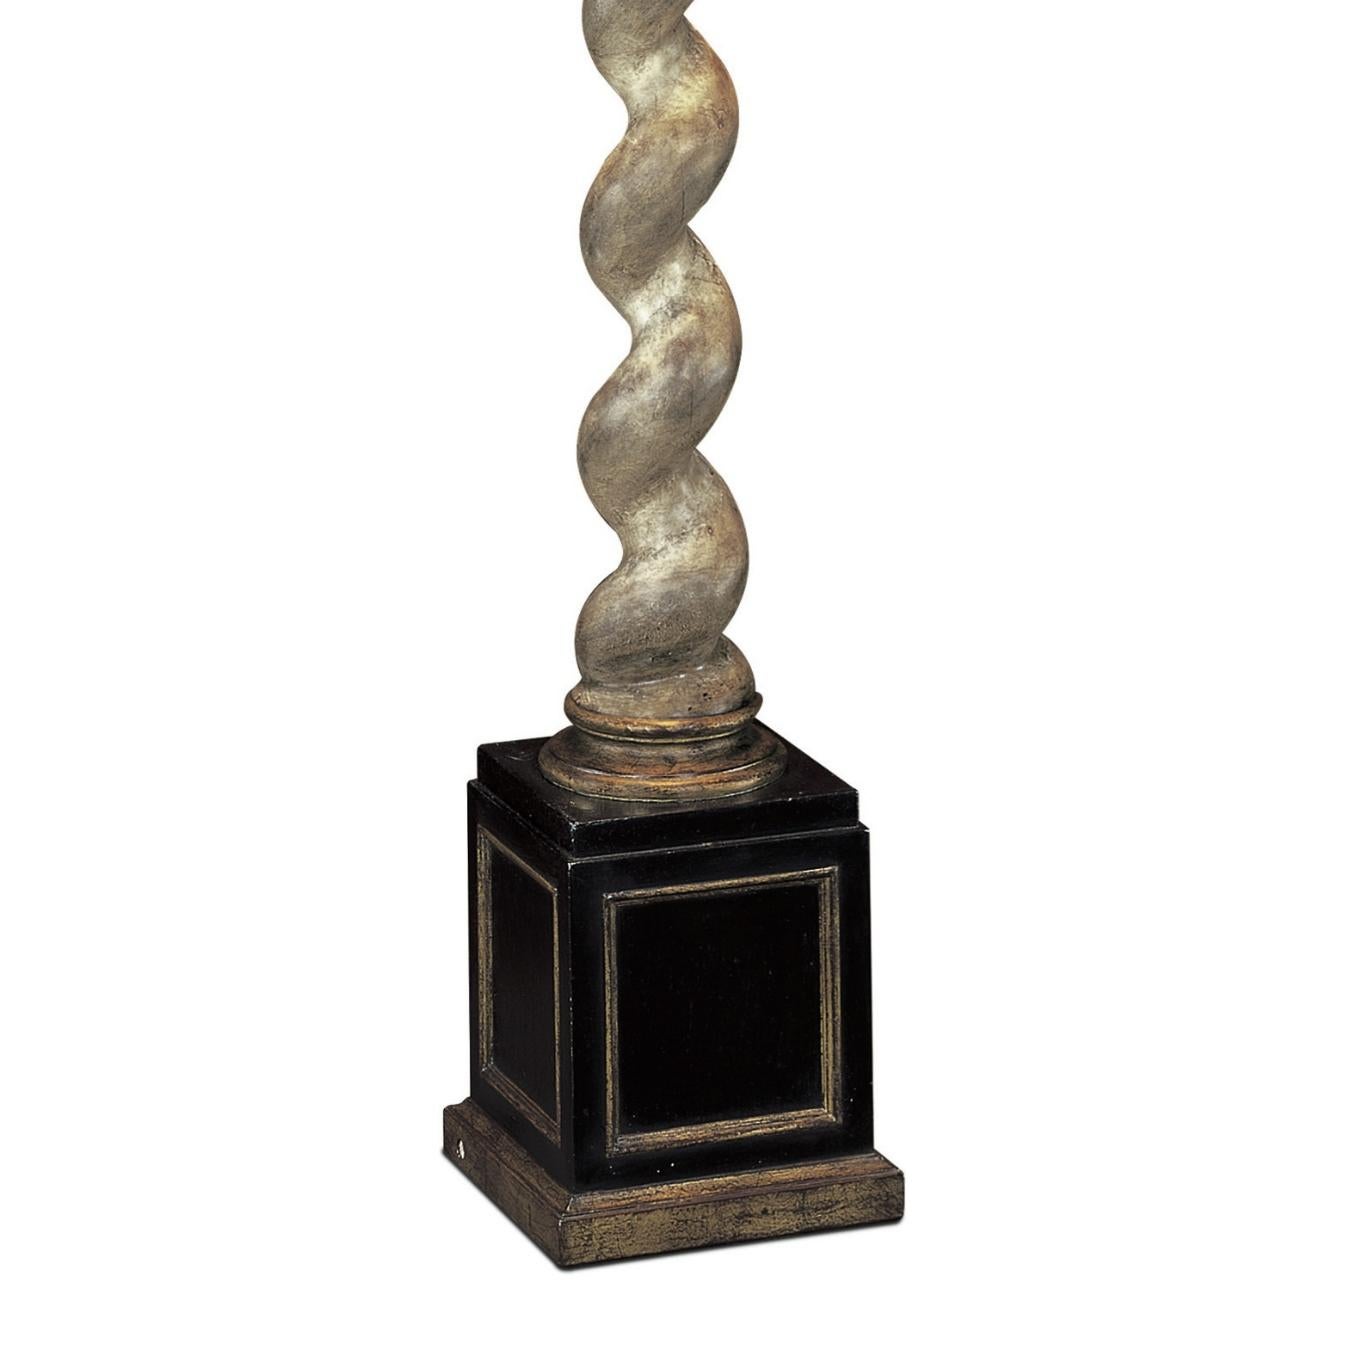 Contemporary Salomonic Twist Lamp Inspired by Columns with Twisted Shaft & Corinthian Capital For Sale